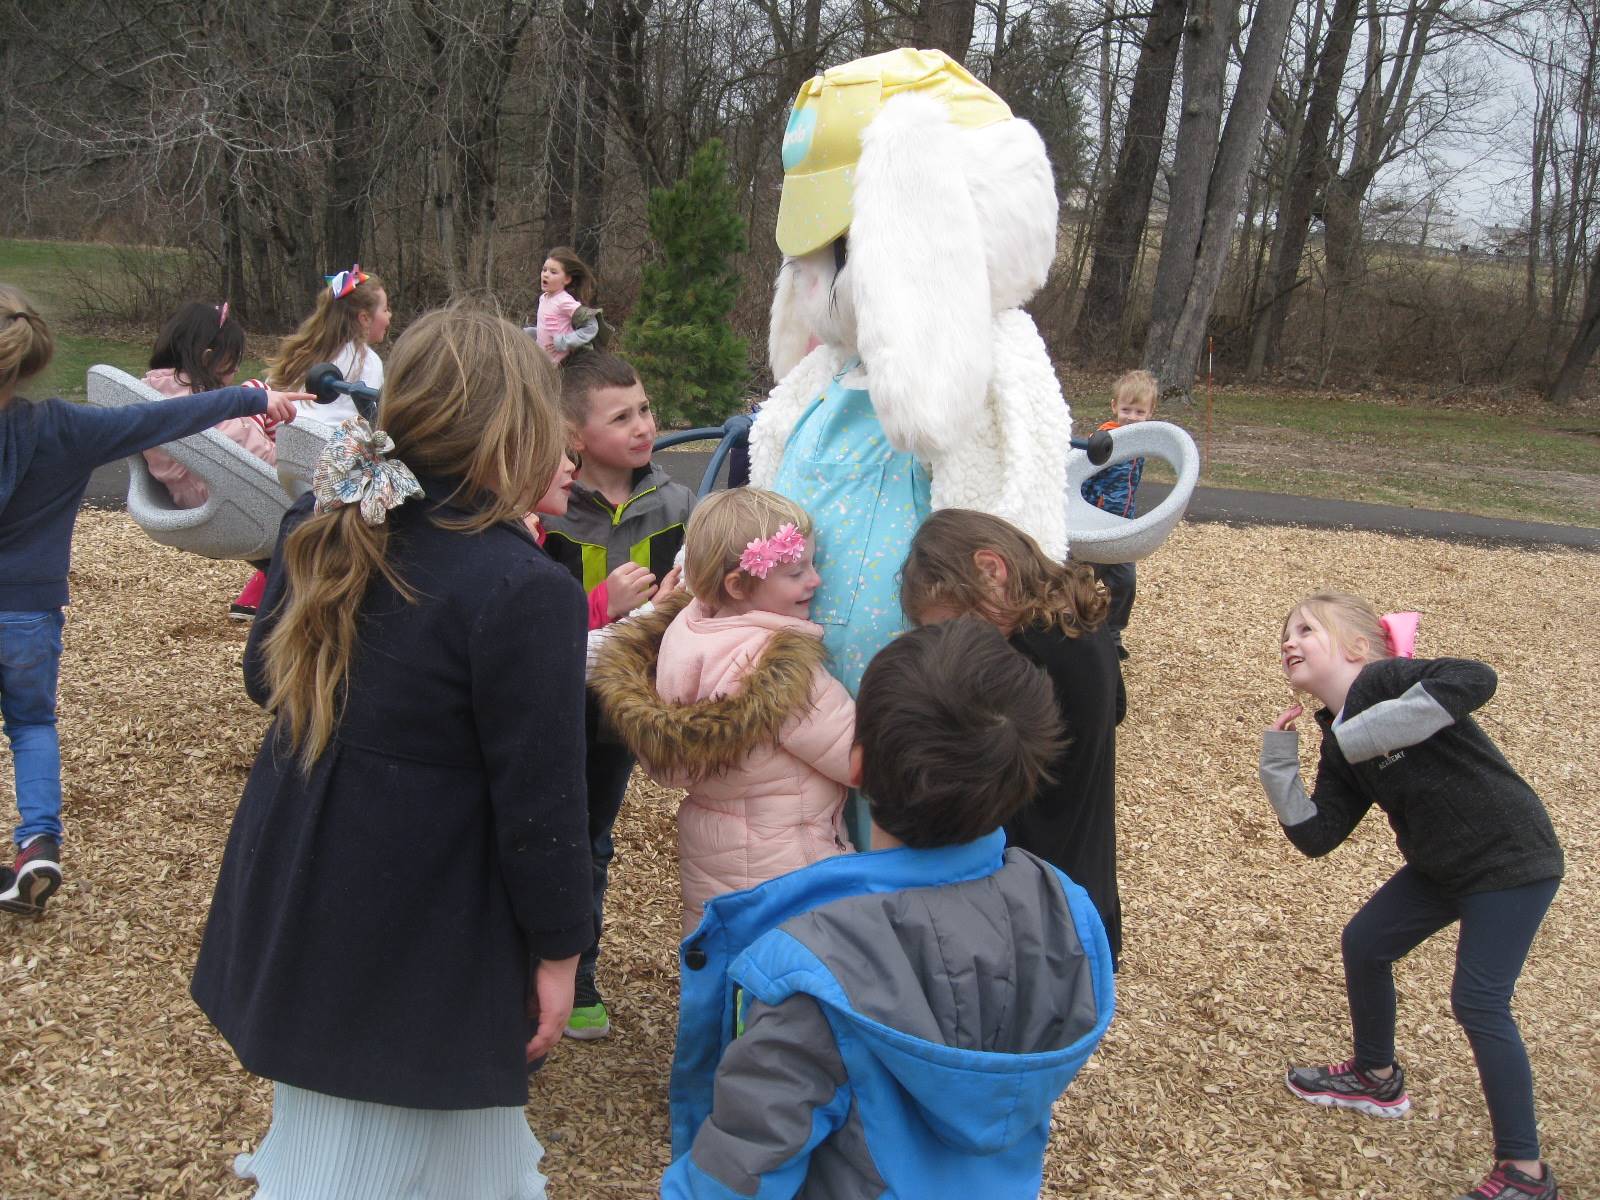 Students give hugs to the Easter Bunny